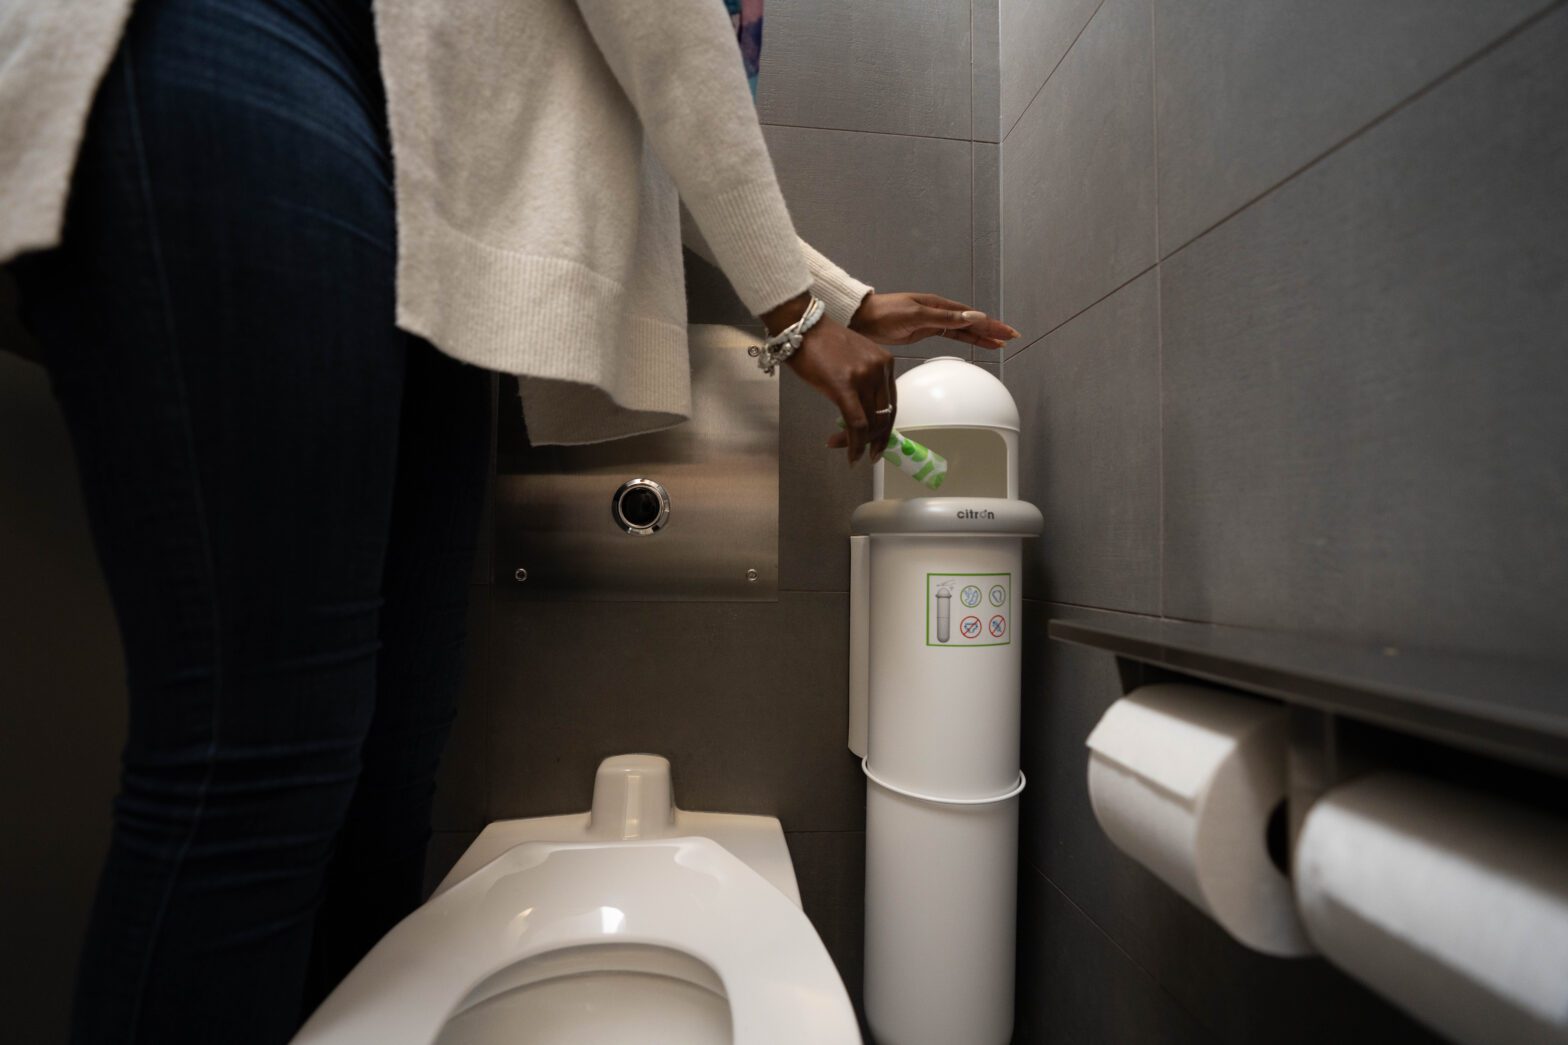 Woman disposal of tampon in a sanitary disposal